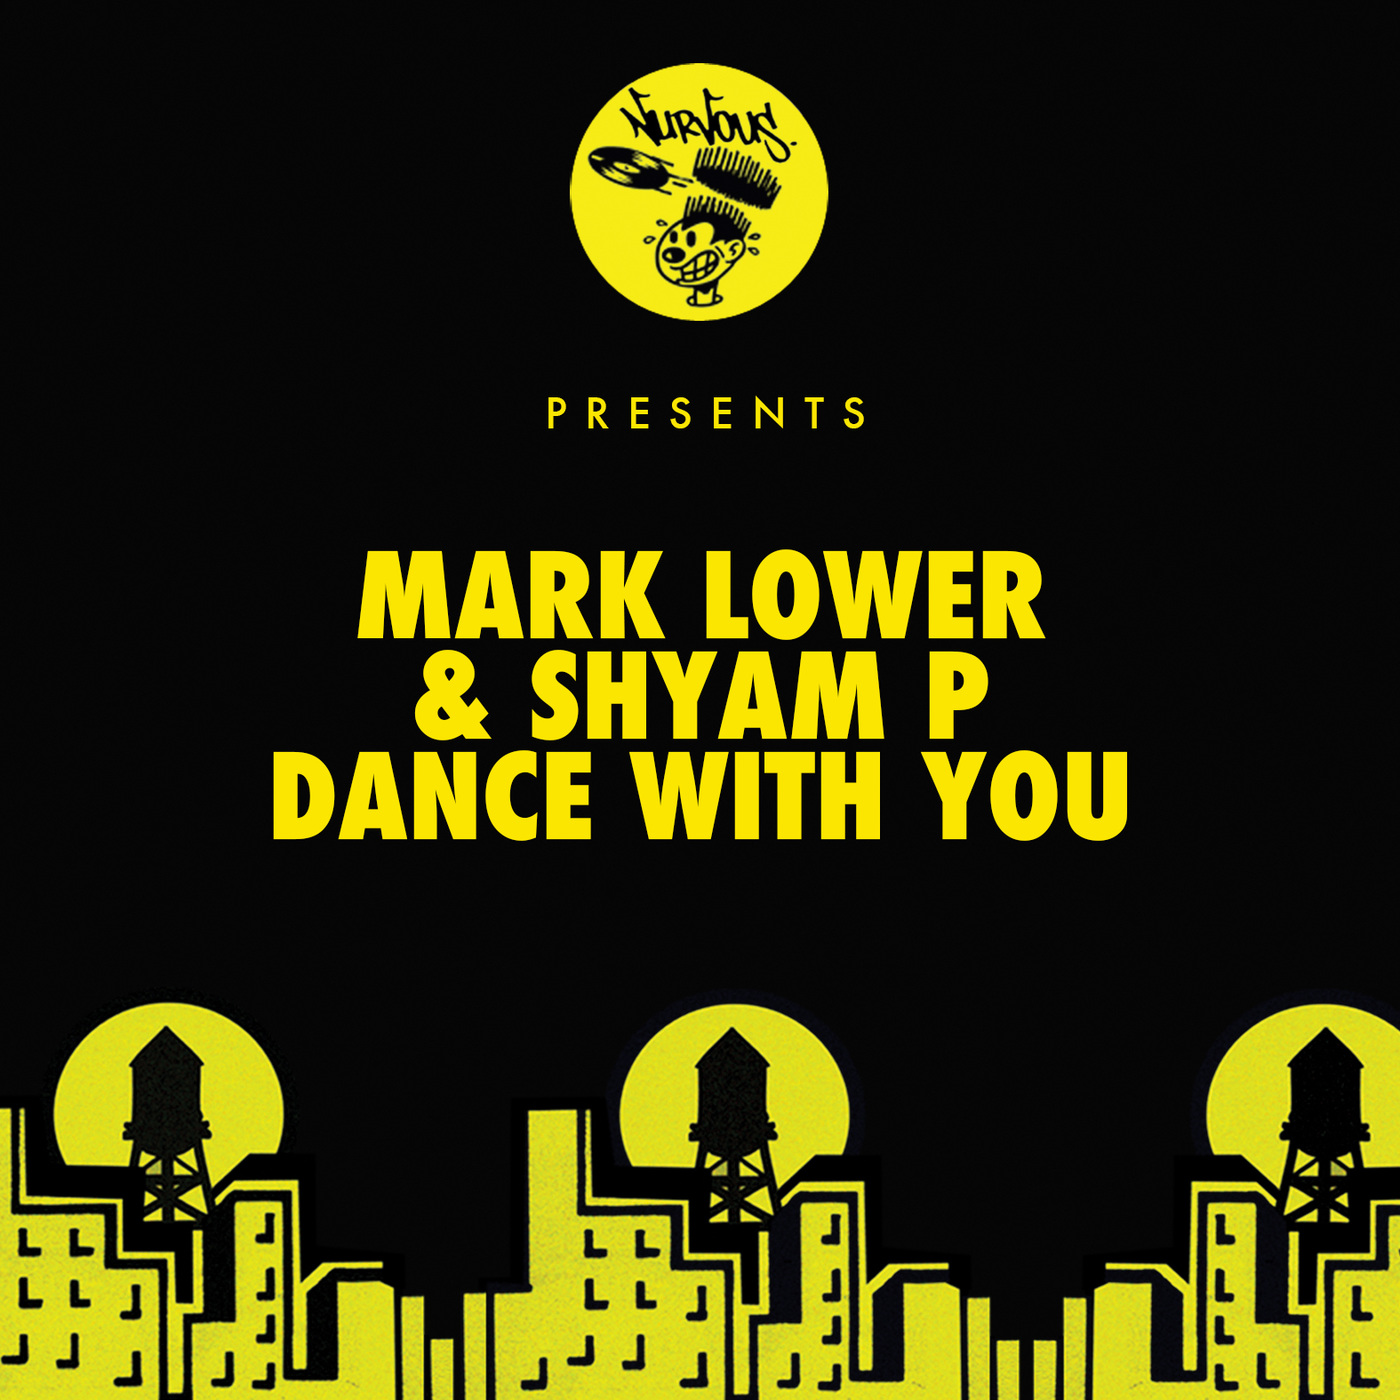 Mark Lower & Shyam P - Dance With You / Nurvous Records